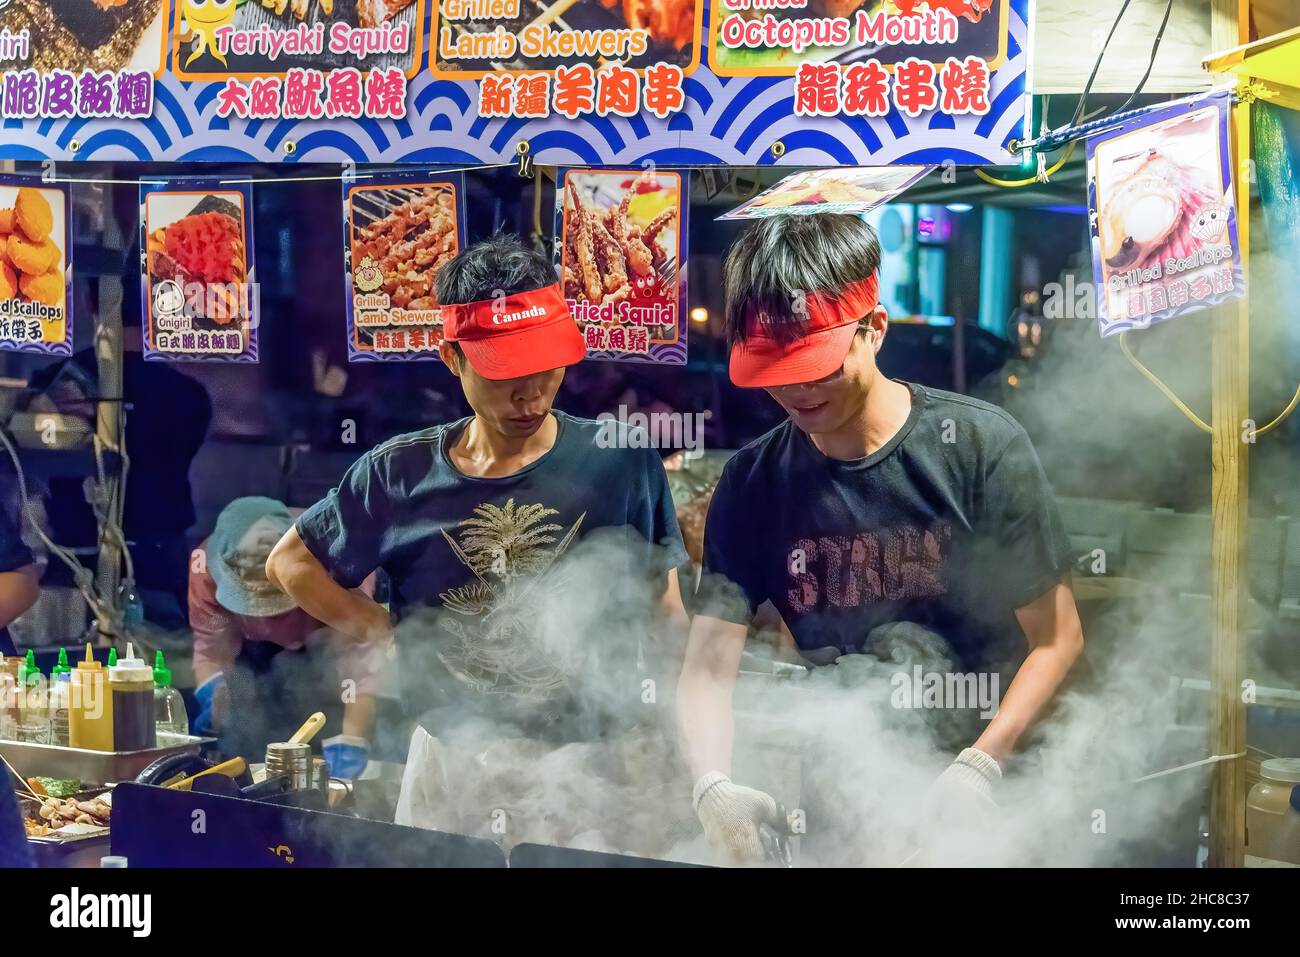 Toronto, Canada-July 4, 2015: Asian immigrants selling food at a street stand during the Taste of Lawrence Festival Stock Photo